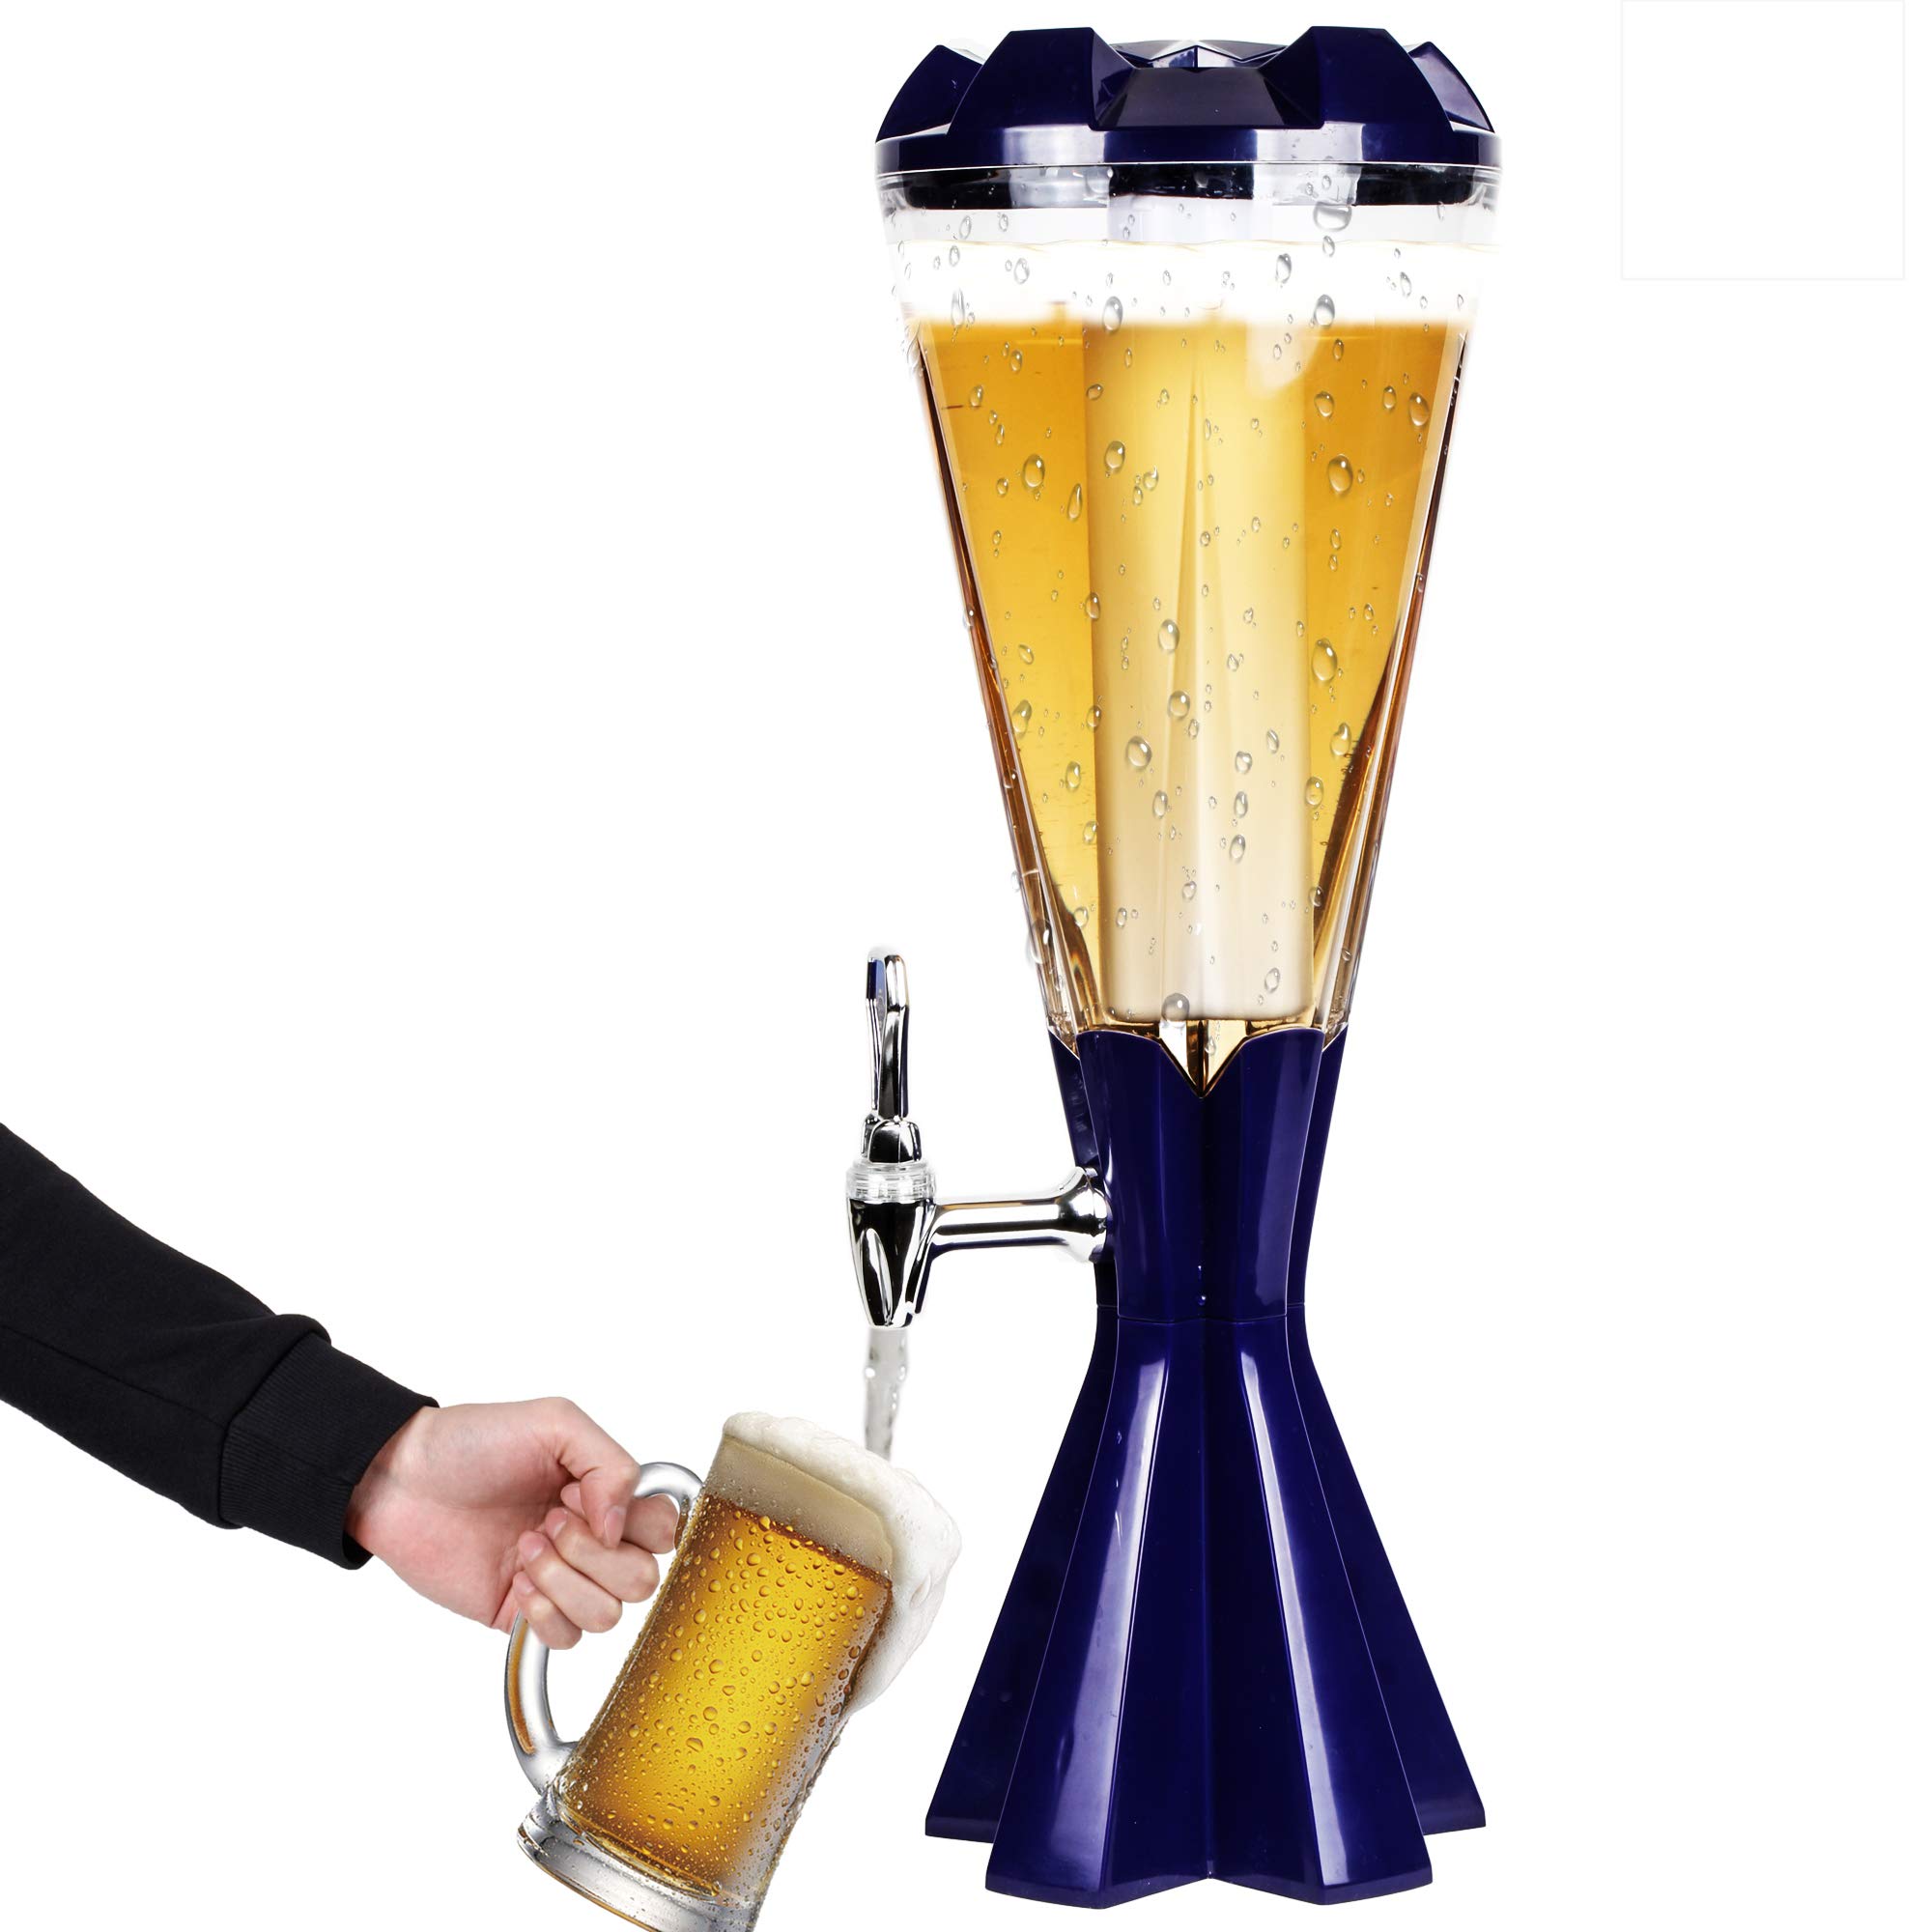 REAWOW Beer Tower Dispenser